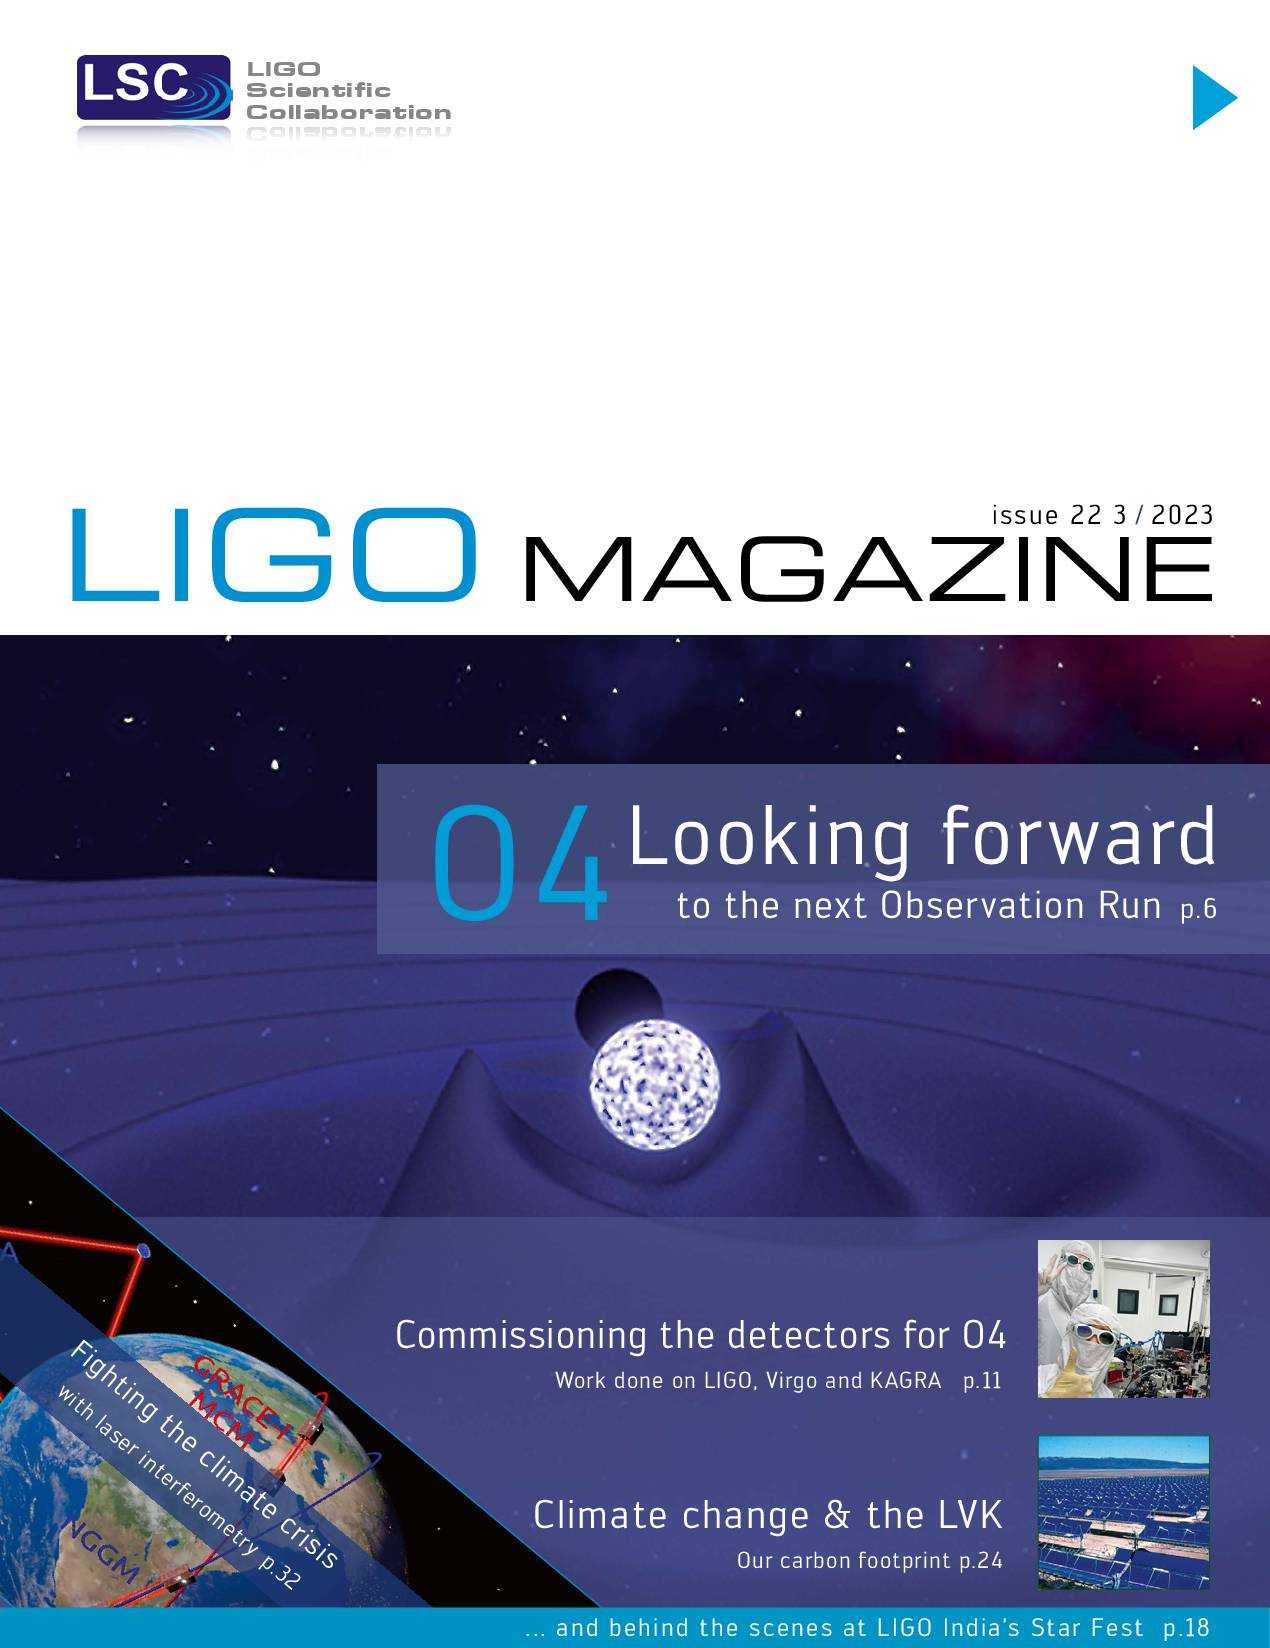 News-Image 14 of: New LIGO Magazine Issue 22 is out